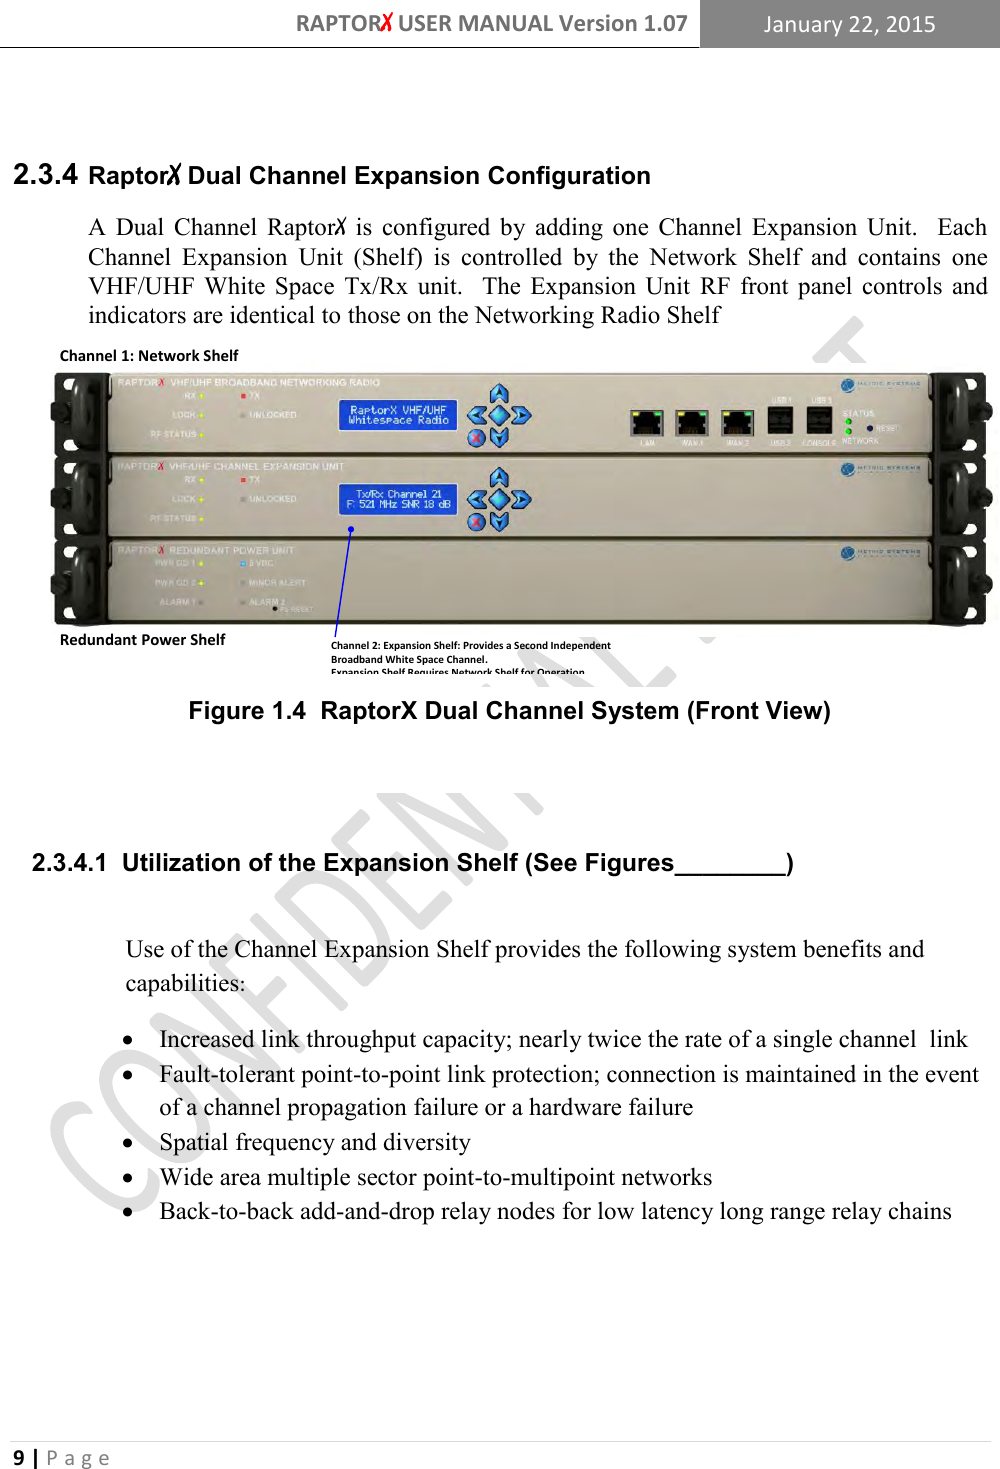 RAPTORX USER MANUAL Version 1.07 January 22, 2015  9 | P a g e     RaptorX Dual Channel Expansion Configuration  2.3.4A  Dual  Channel  RaptorX  is  configured  by  adding  one  Channel  Expansion  Unit.    Each Channel  Expansion  Unit  (Shelf)  is  controlled  by  the  Network  Shelf  and  contains  one VHF/UHF  White  Space  Tx/Rx  unit.    The  Expansion  Unit  RF  front  panel  controls  and indicators are identical to those on the Networking Radio Shelf     2.3.4.1  Utilization of the Expansion Shelf (See Figures________)  Use of the Channel Expansion Shelf provides the following system benefits and capabilities:  Increased link throughput capacity; nearly twice the rate of a single channel  link  Fault-tolerant point-to-point link protection; connection is maintained in the event of a channel propagation failure or a hardware failure  Spatial frequency and diversity  Wide area multiple sector point-to-multipoint networks  Back-to-back add-and-drop relay nodes for low latency long range relay chains     Figure 1.4  RaptorX Dual Channel System (Front View) Channel 2: Expansion Shelf: Provides a Second Independent Broadband White Space Channel.Expansion Shelf Requires Network Shelf for Operation.Redundant Power ShelfChannel 1: Network Shelf